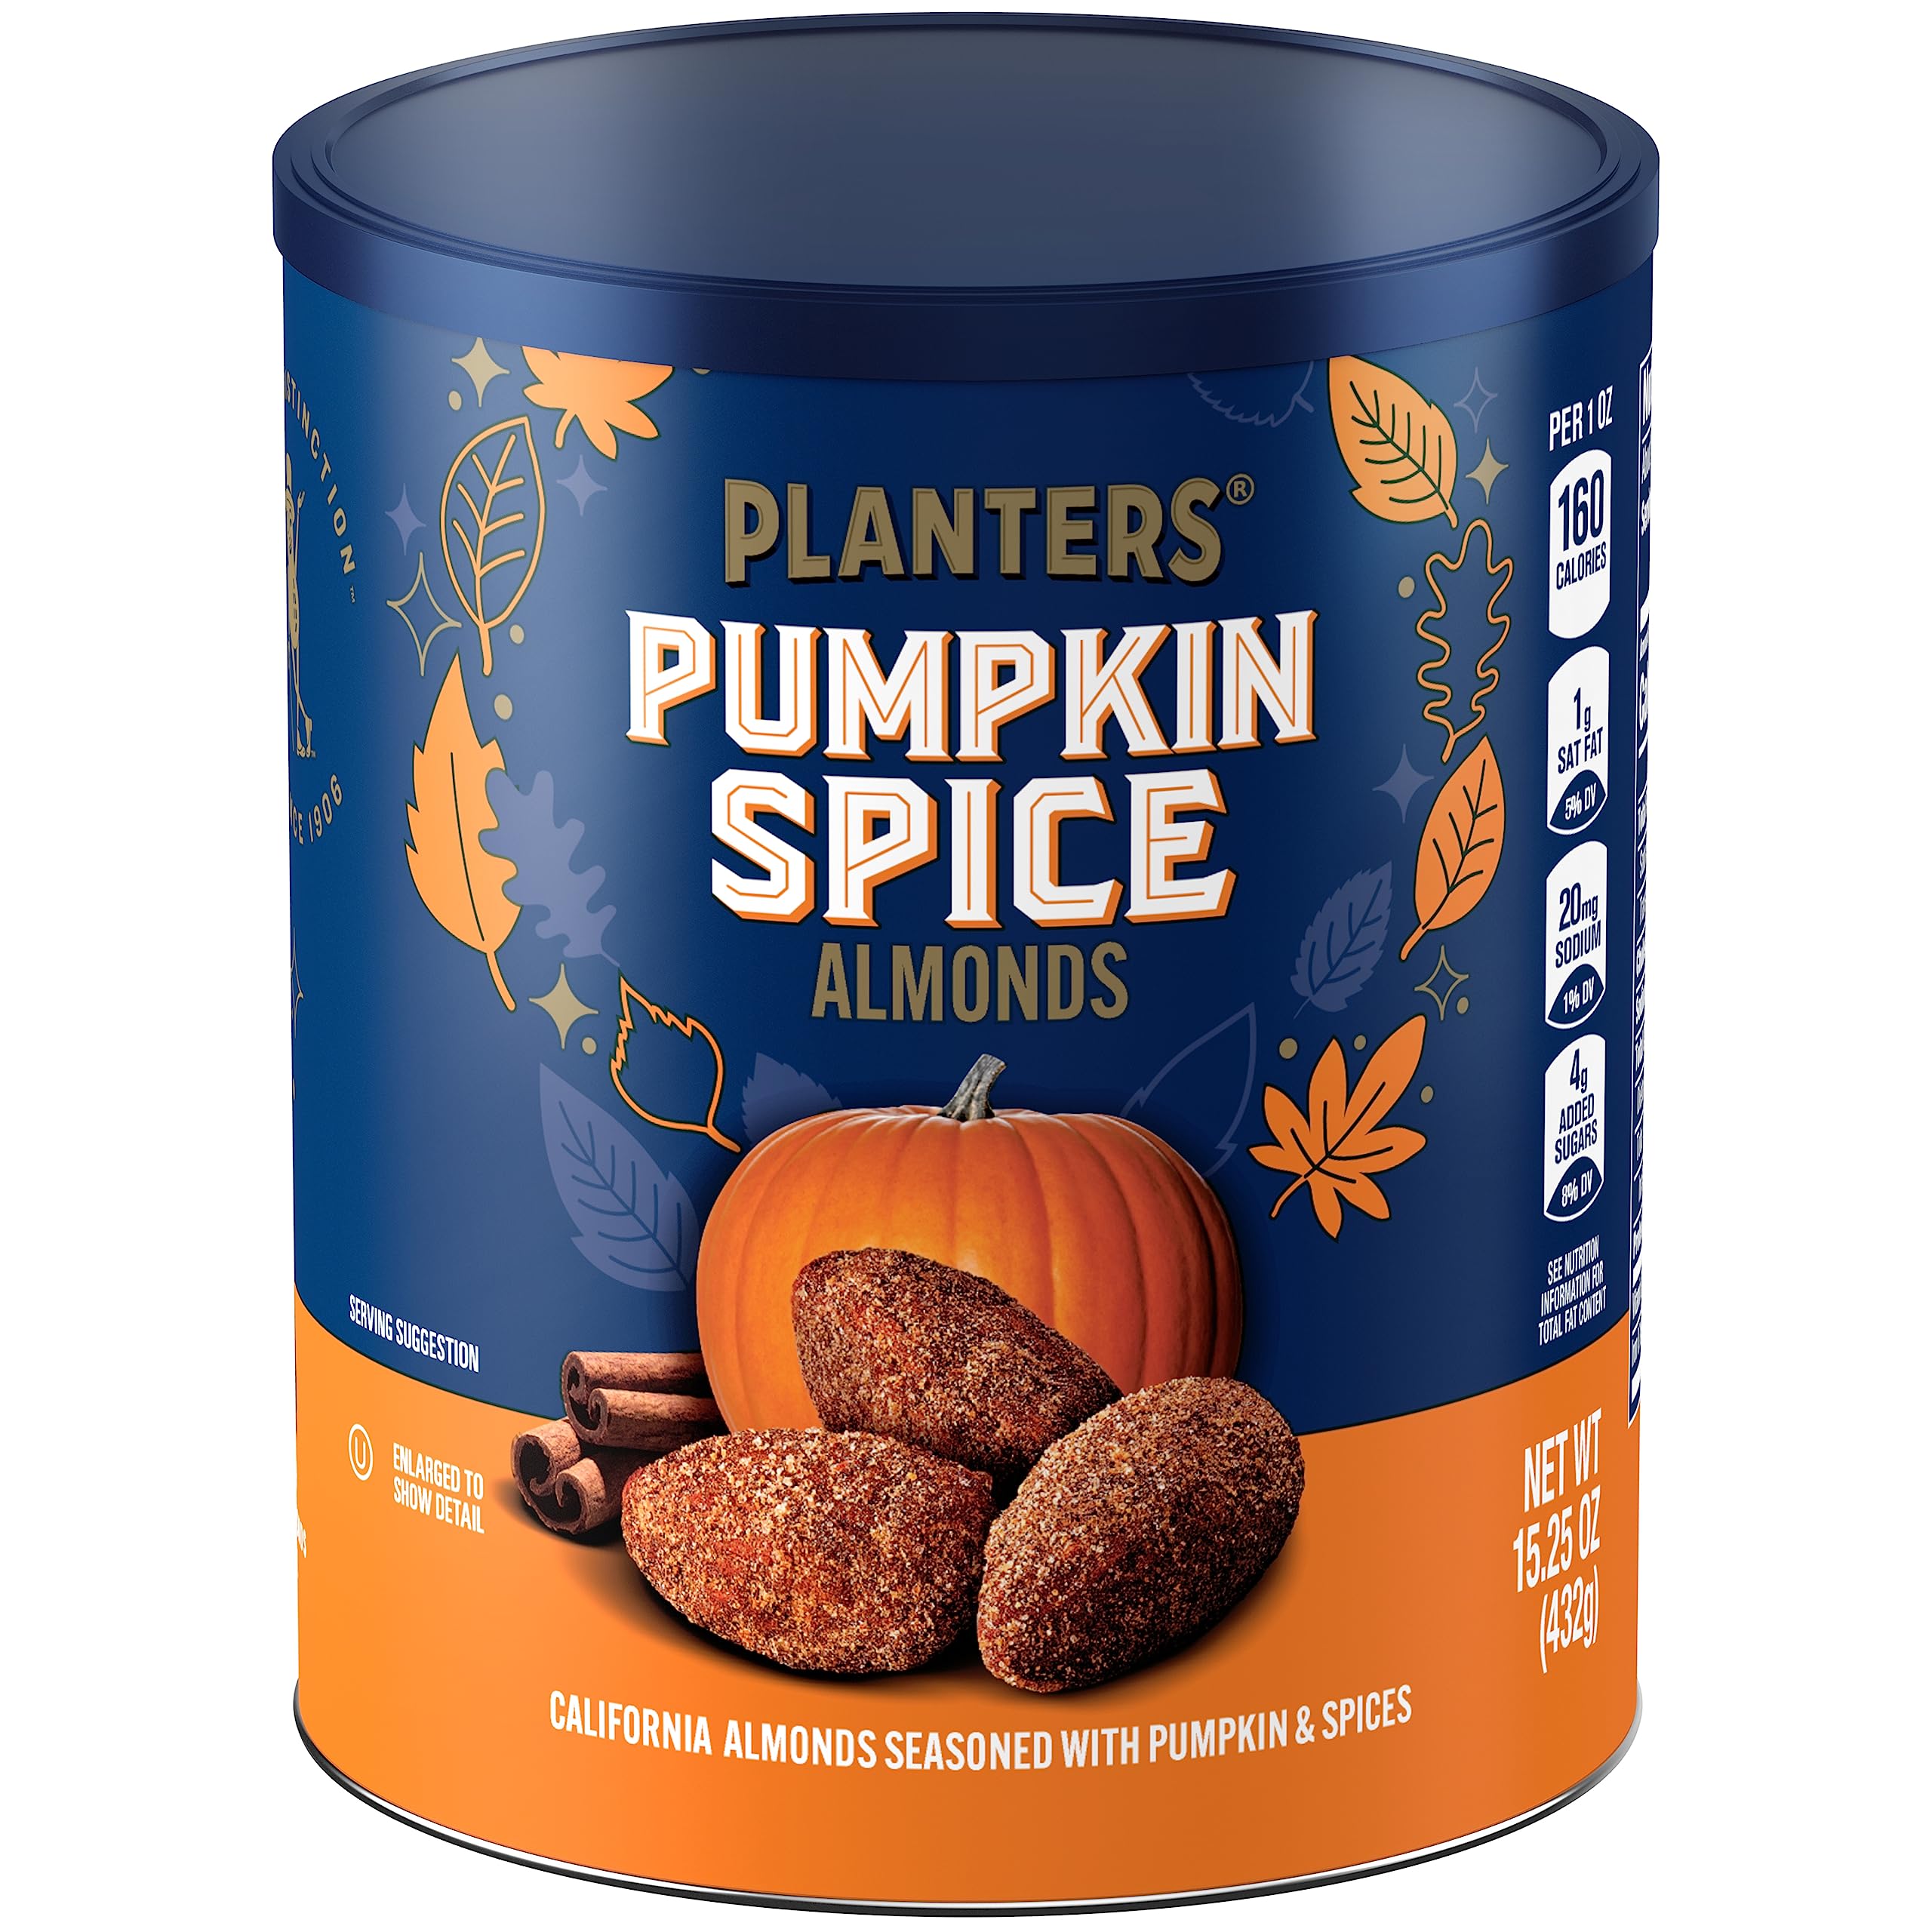 15.25-Oz Planters Pumpkin Spice Almonds $5.59 w/ S&S + Free Shipping w/ Prime or on orders over $35